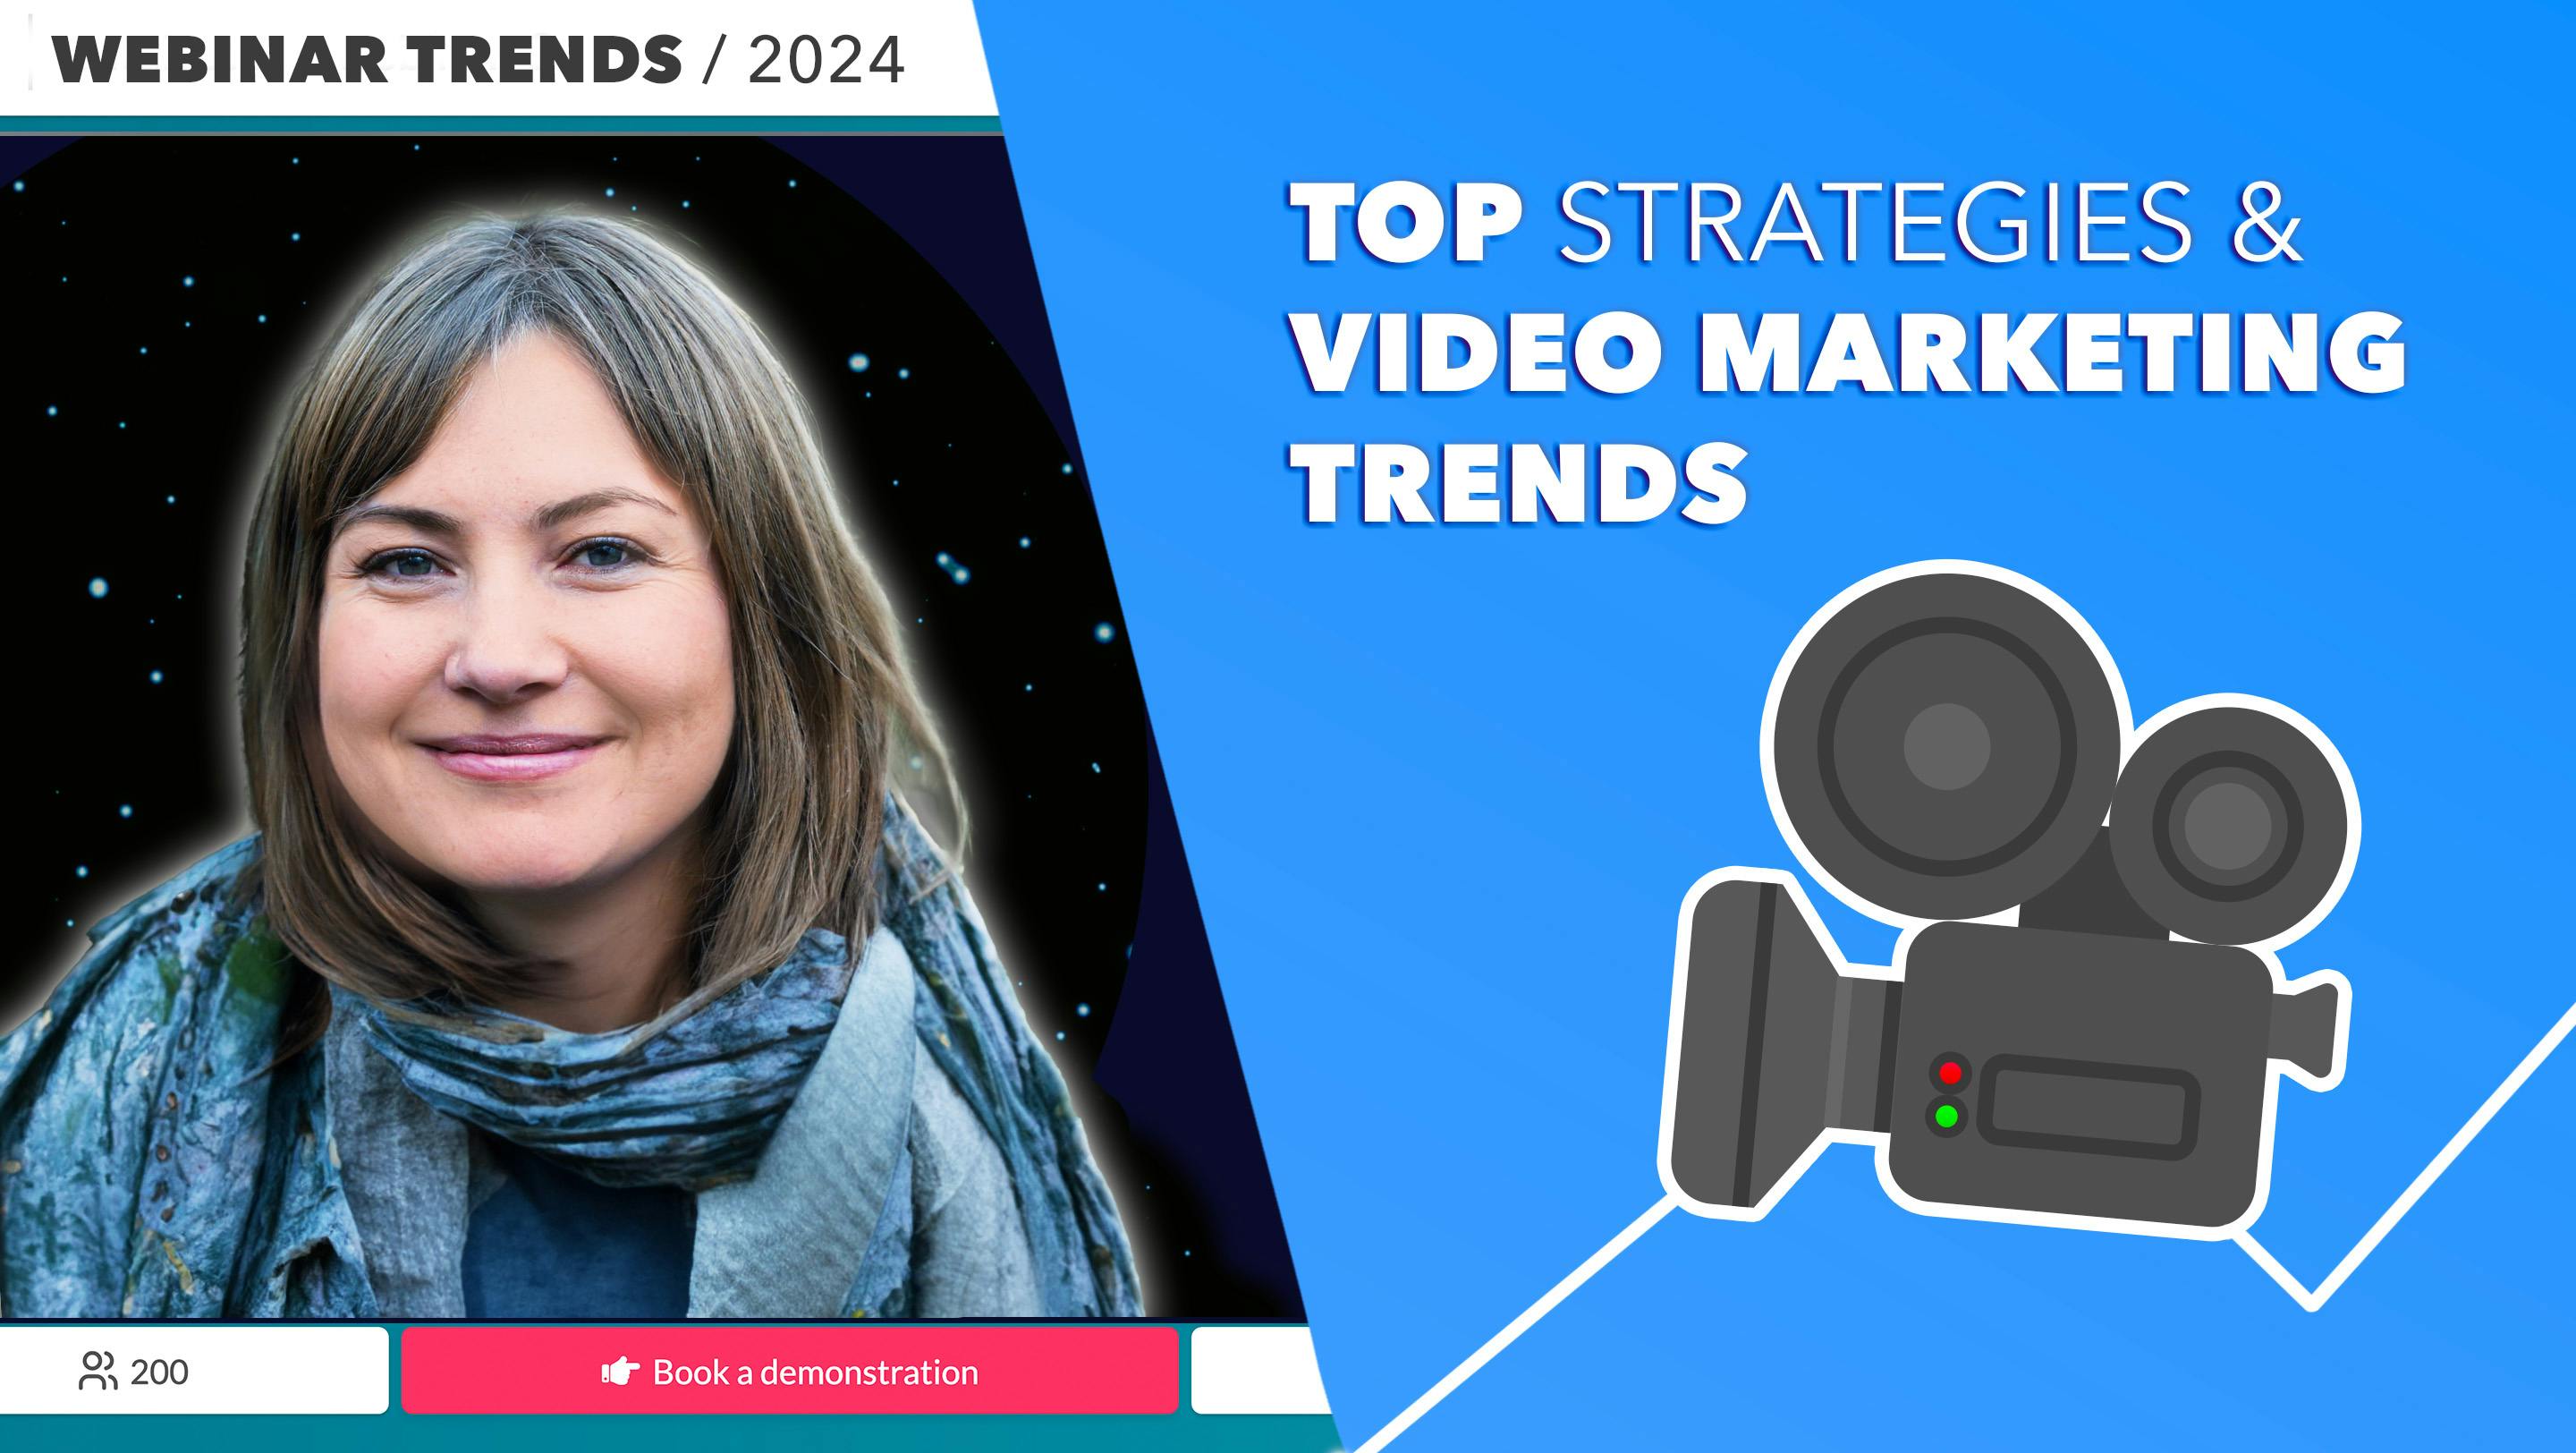 Discover the top strategies and video marketing trends for 2024 with this webinar guide. Host webinars like the top 1% of hosts with 5 actionable tips. And stay ahead of the curve with 3 key trends in B2B video marketing for 2024.